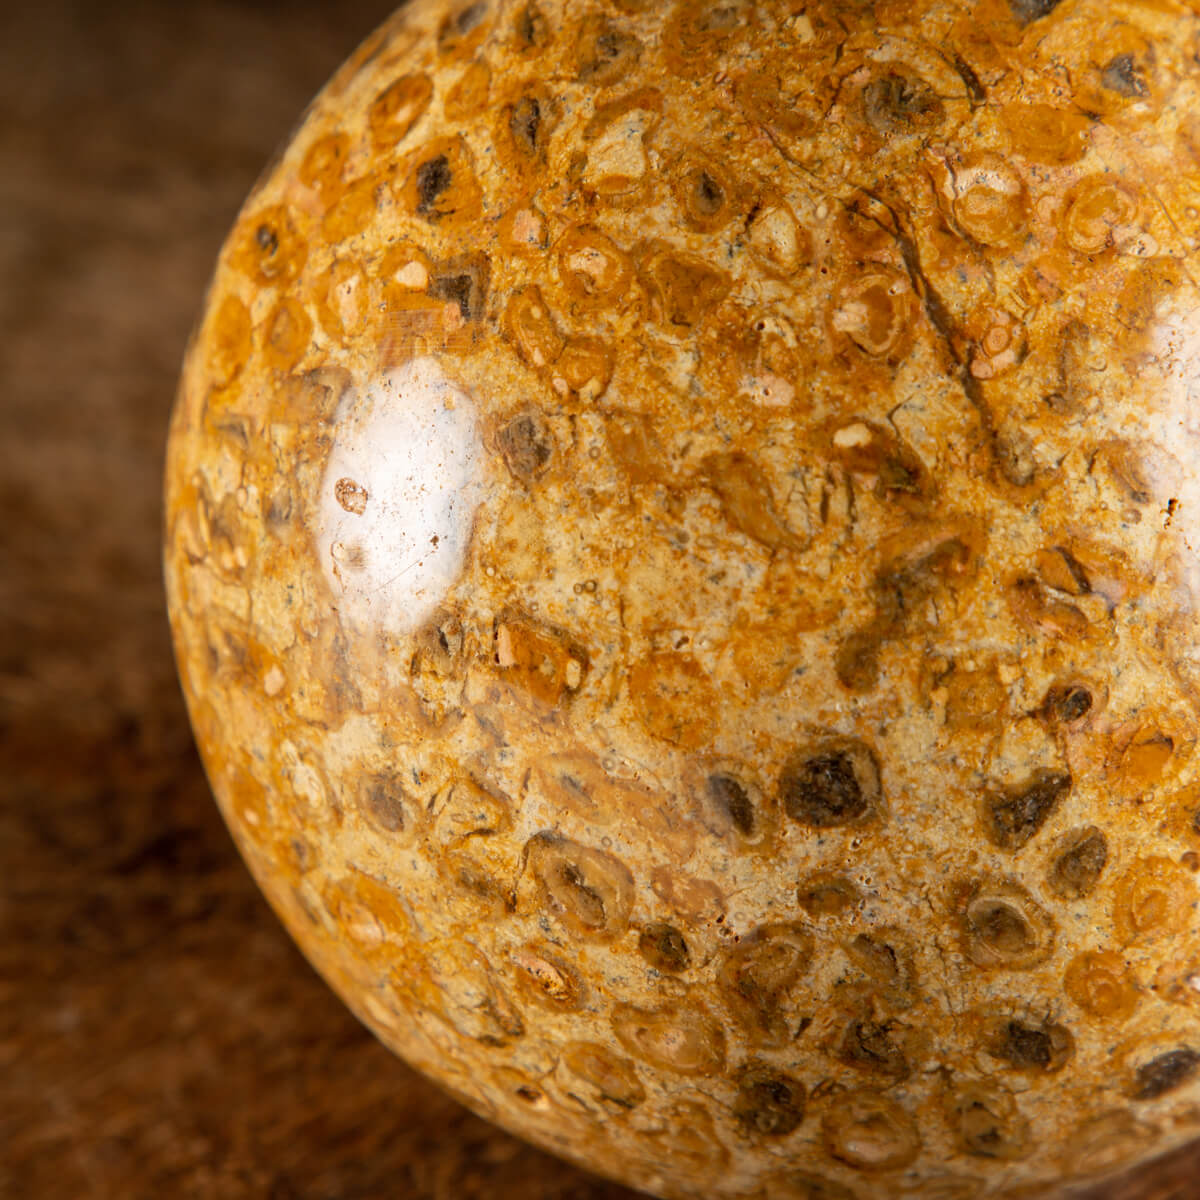 Fossil Coral Sphere